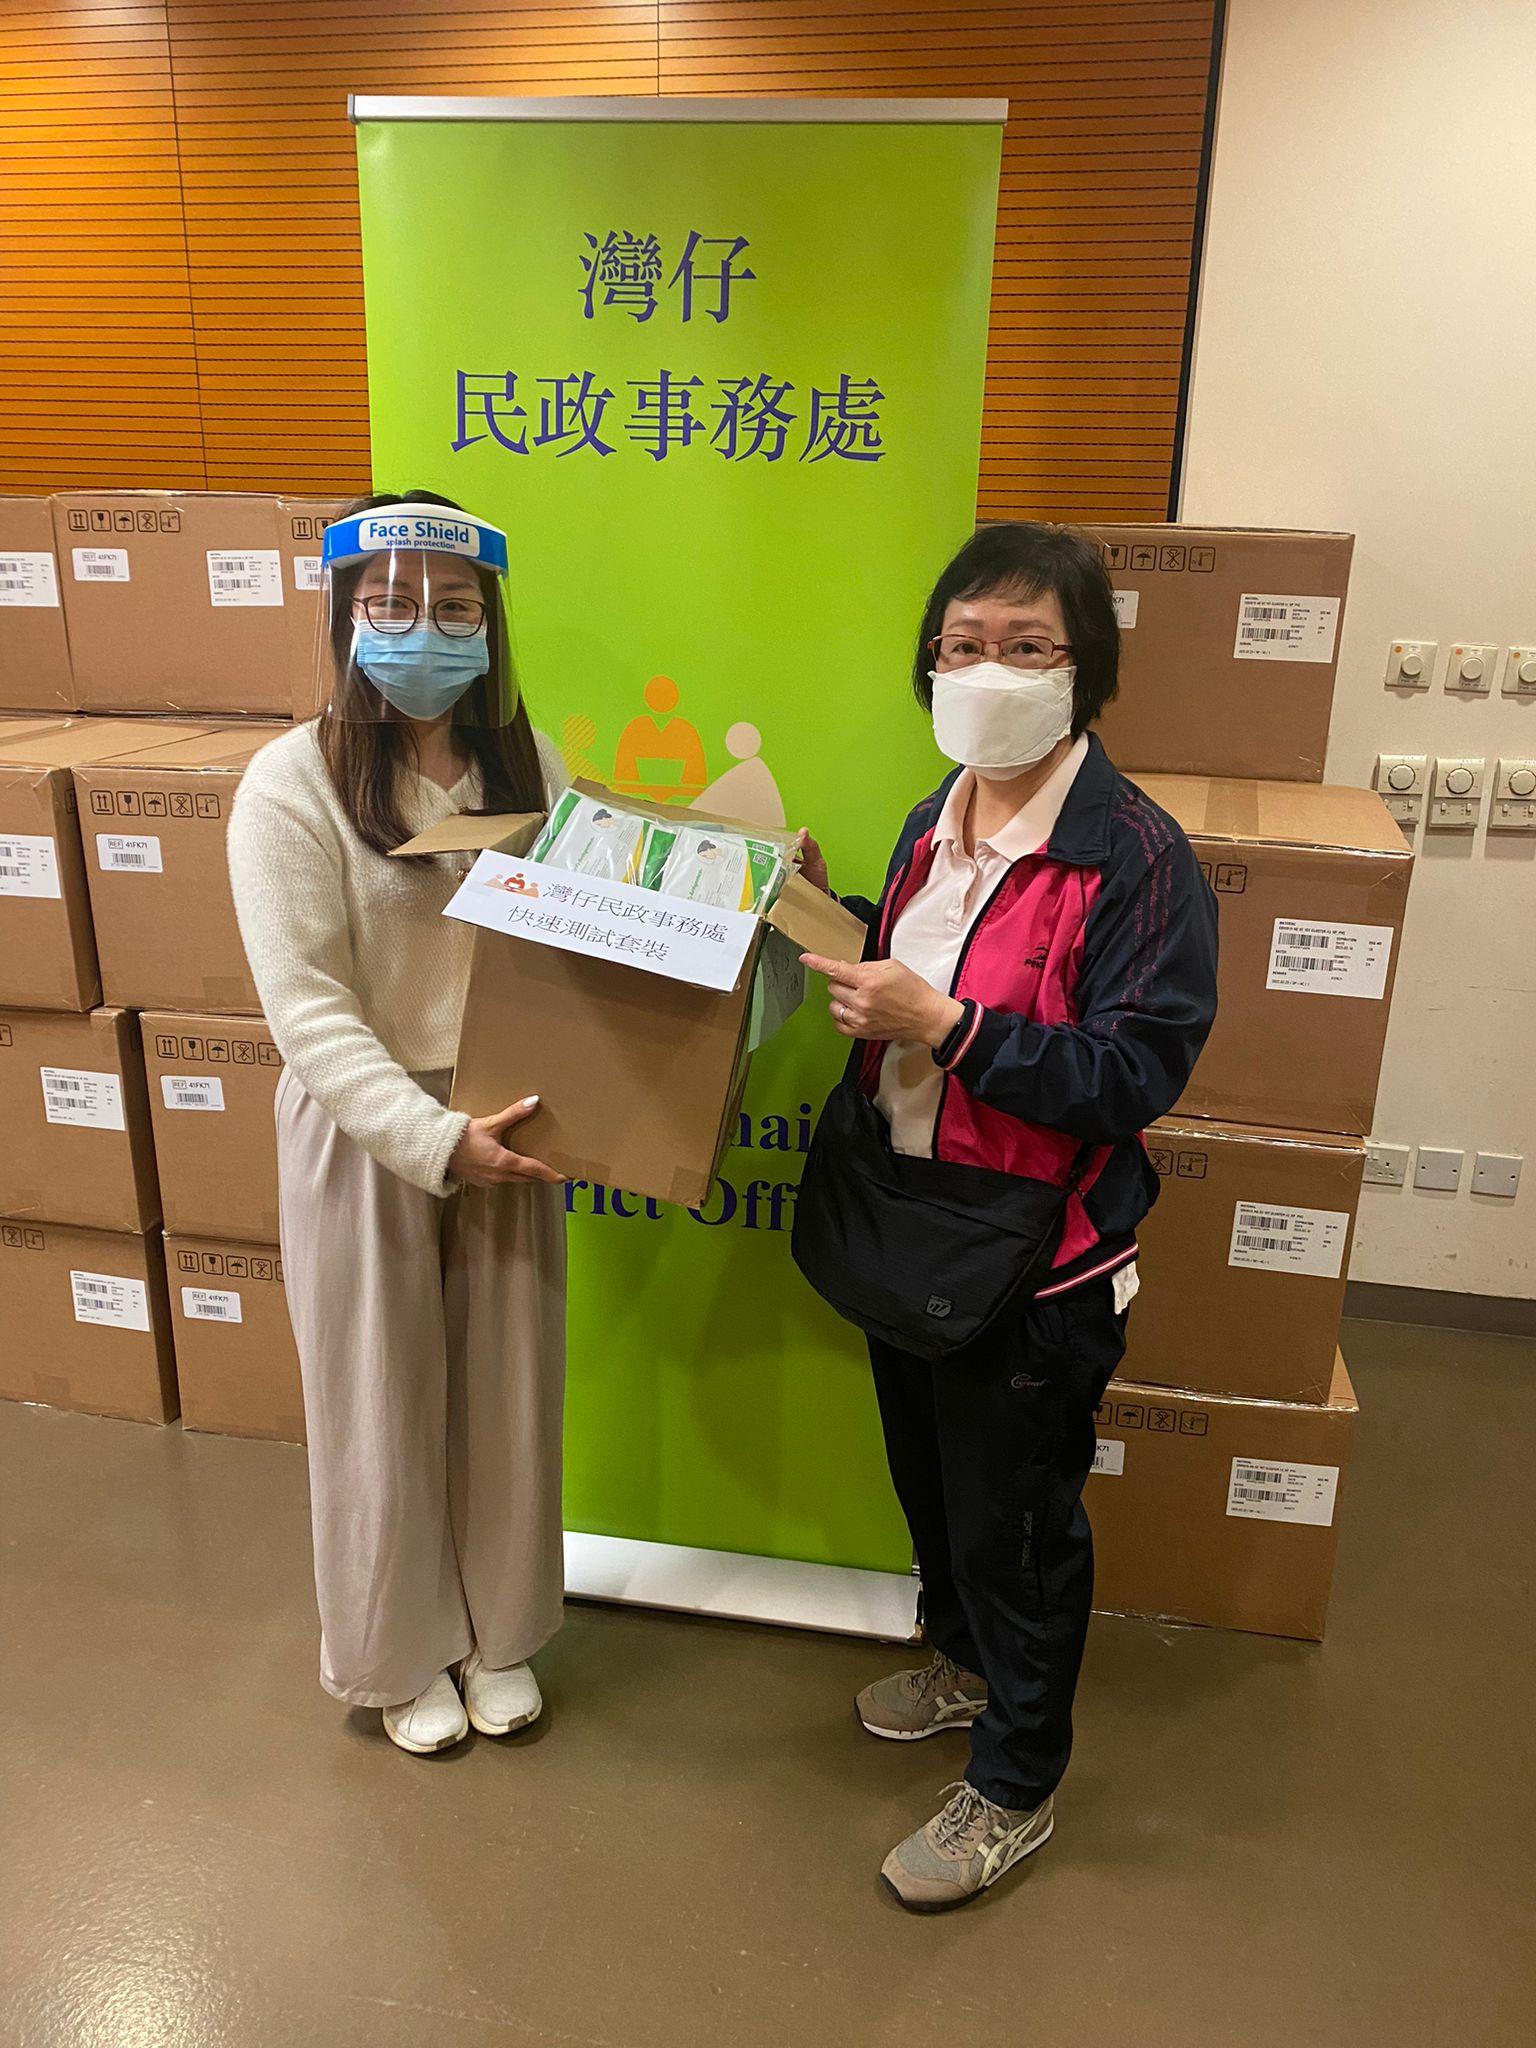 The Wan Chai District Office today (March 6) distributed COVID-19 rapid test kits to households, cleansing workers and property management staff living and working in residential premises near Victoria Park and Tin Hau areas and within the affected area for voluntary testing through the owners' corporations and property management companies. 